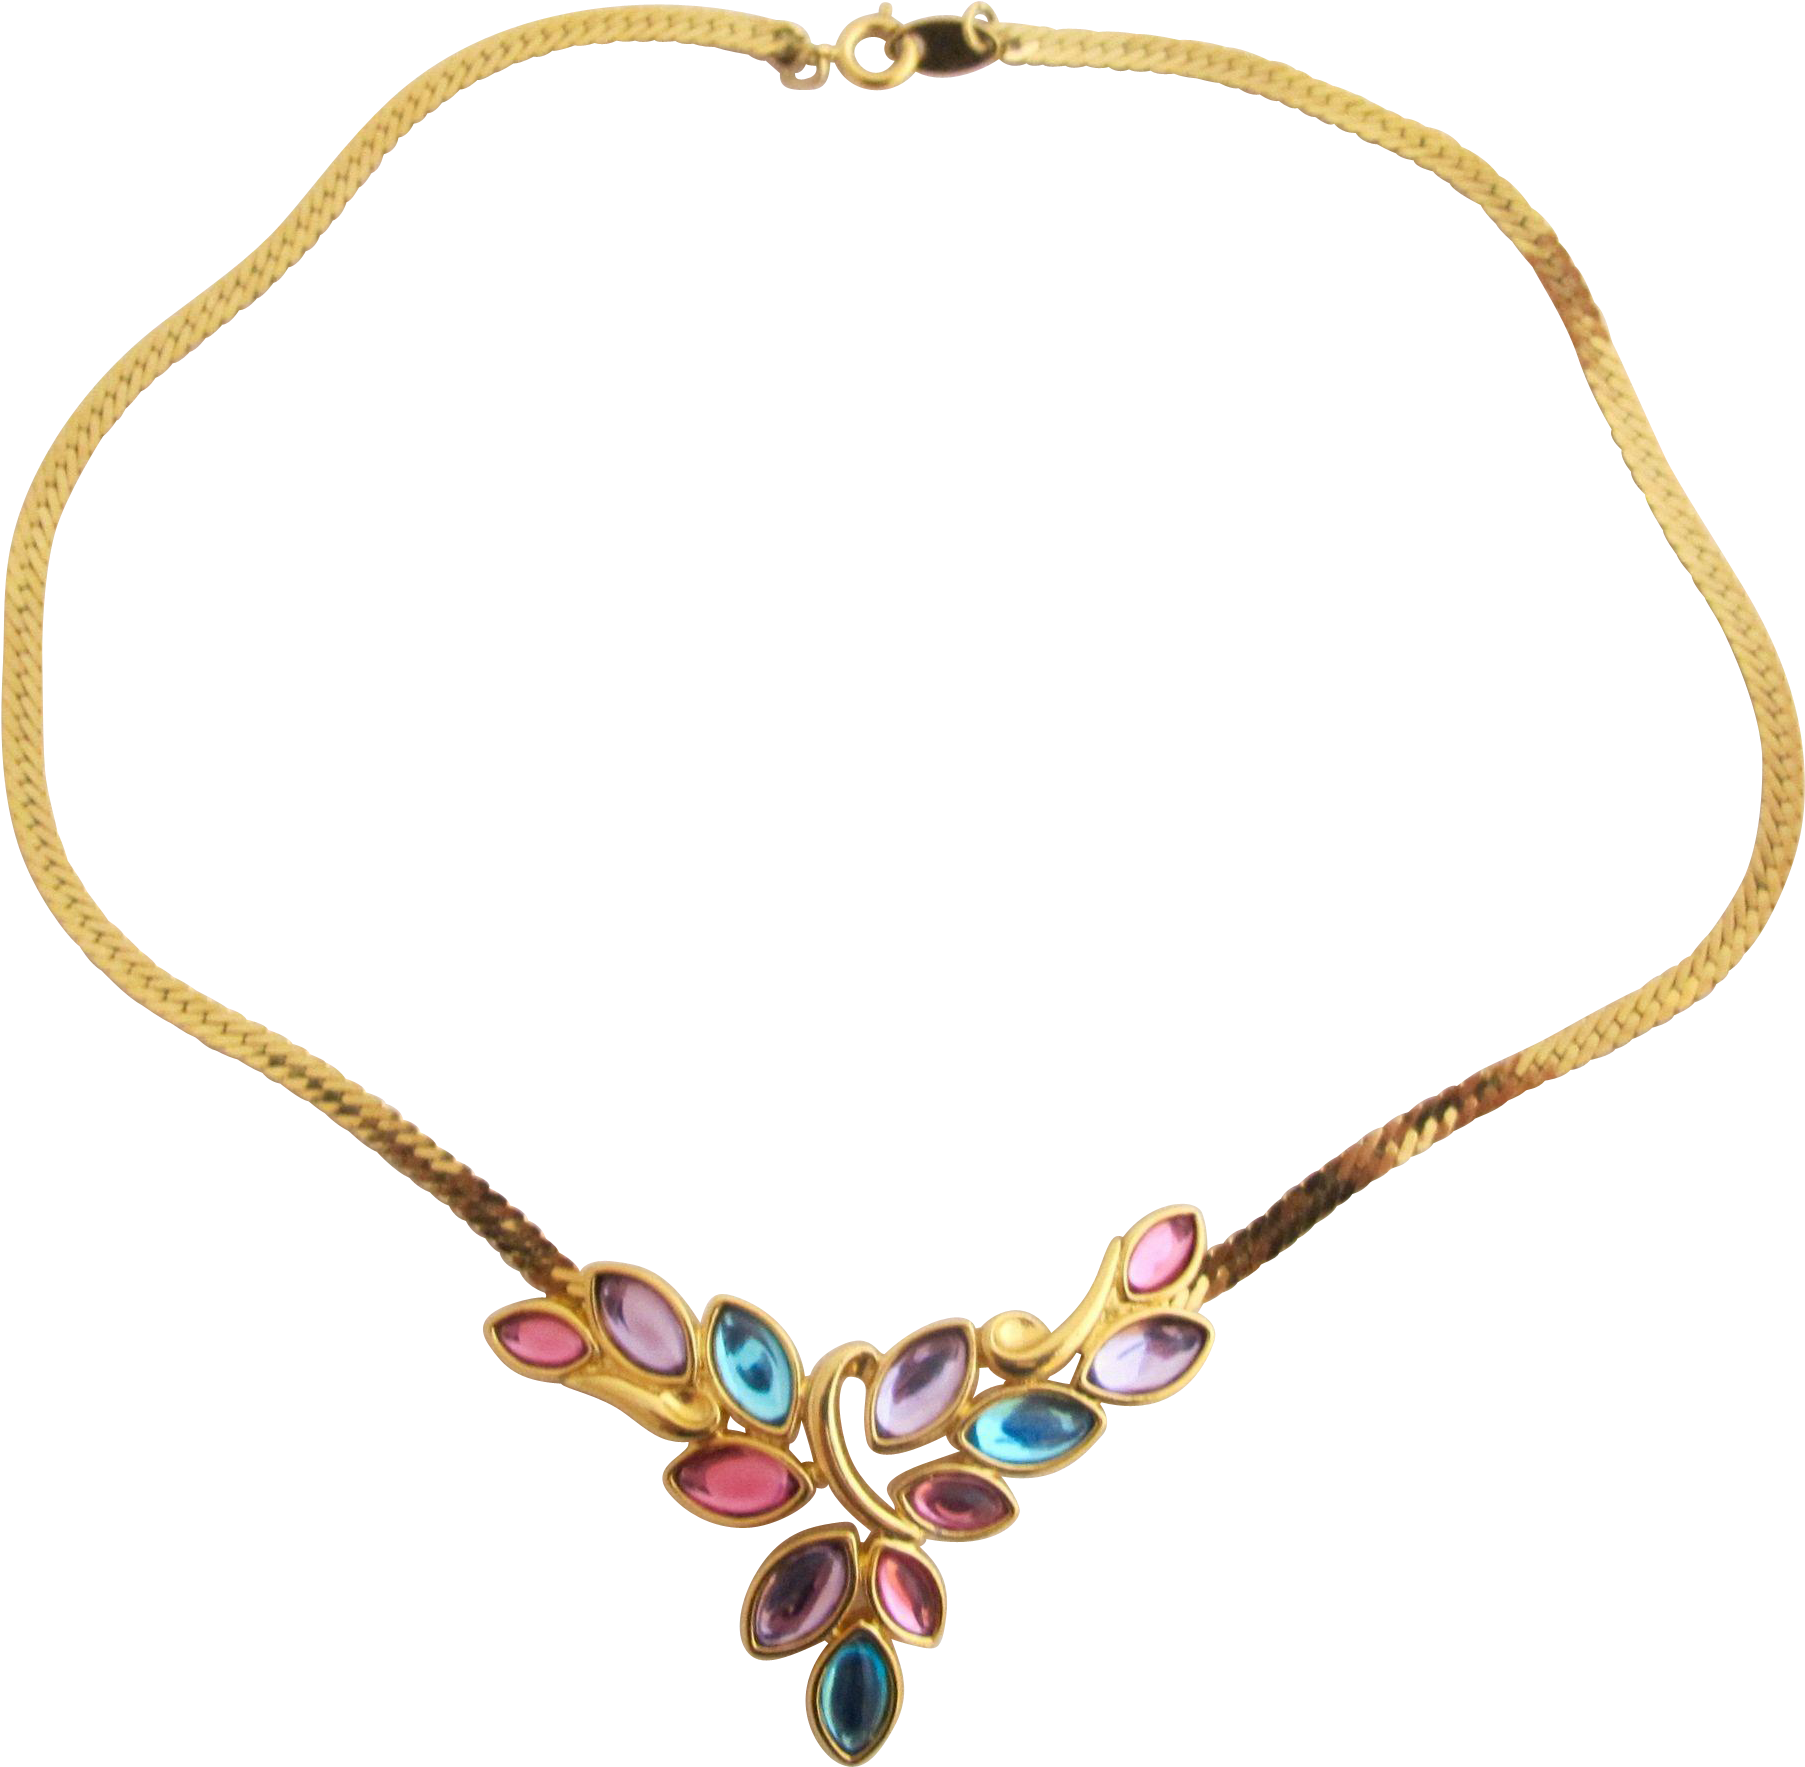 Download PNG image - Choker Necklace PNG Pic 